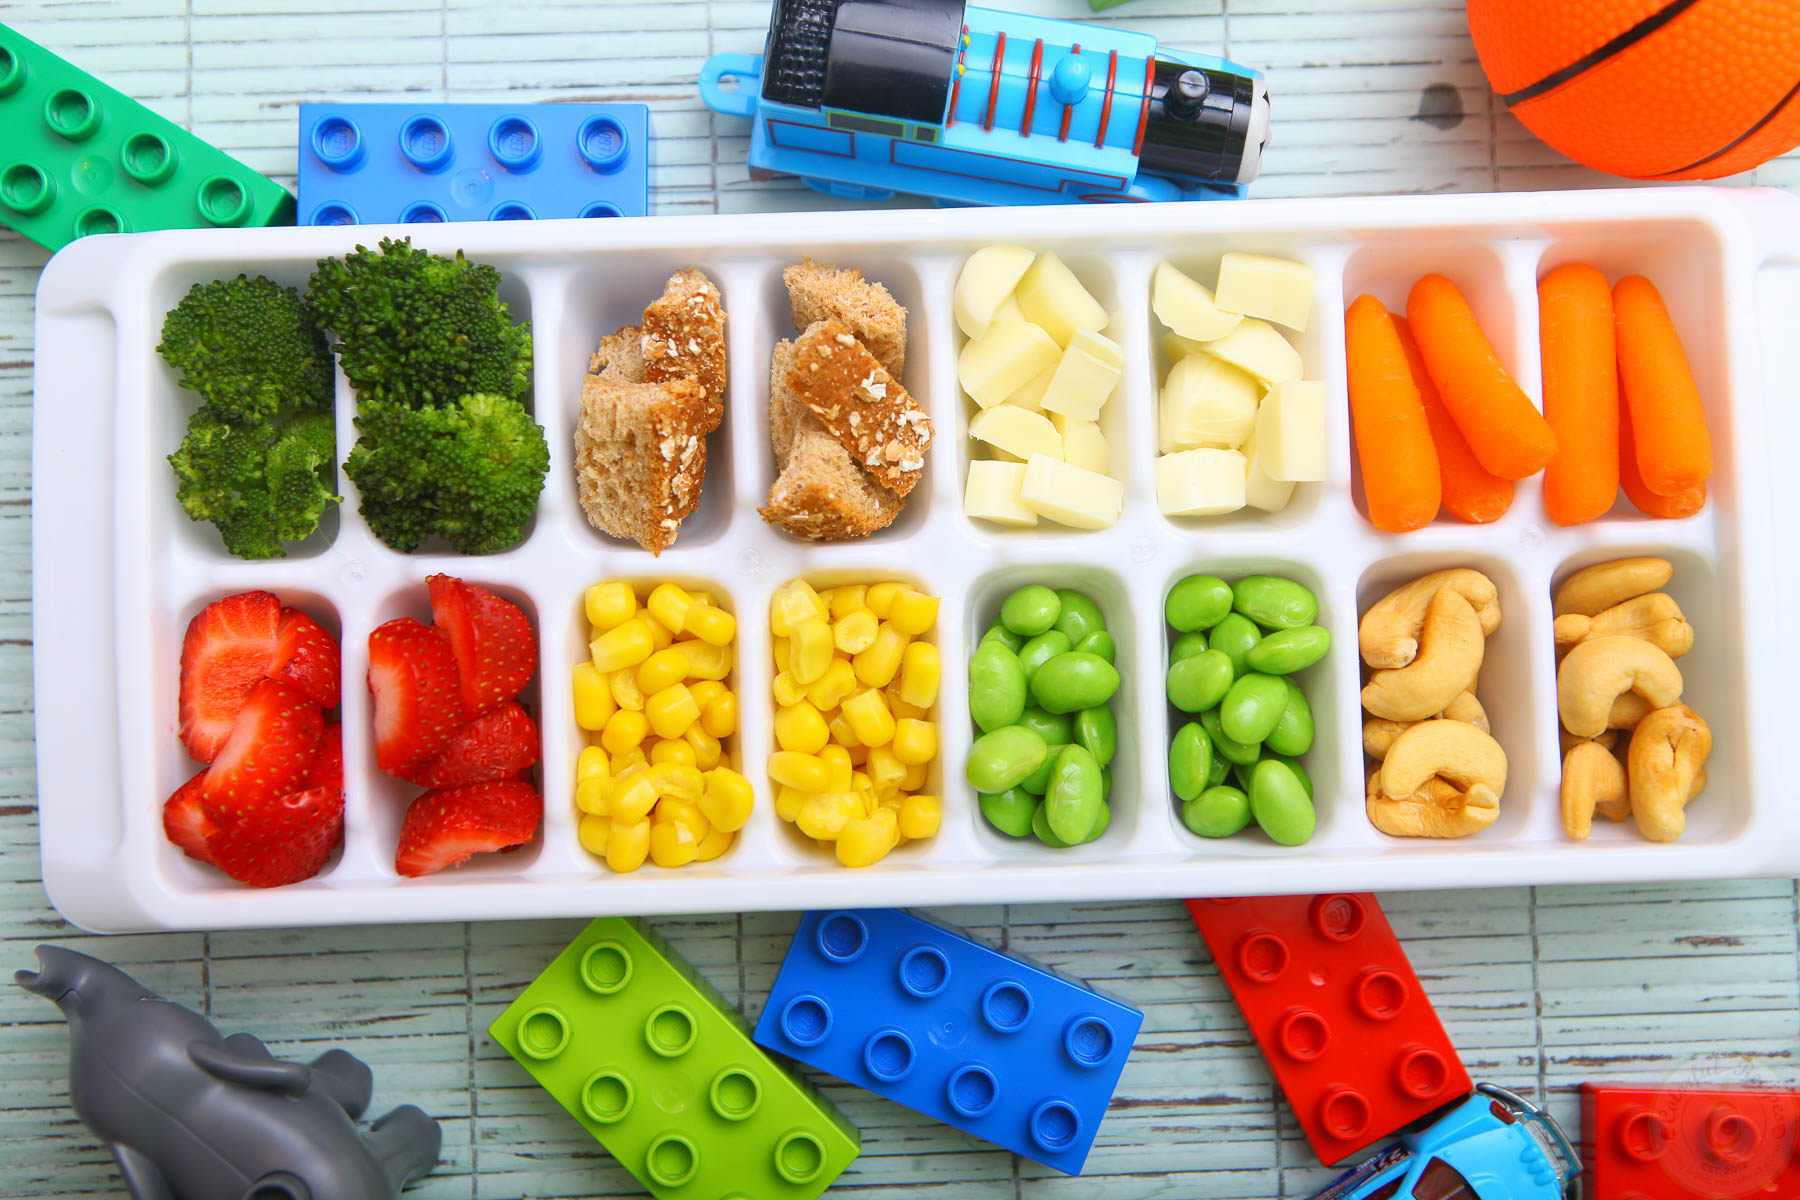 https://colorfulrecipes.com/wp-content/uploads/2015/12/toddler-approved-ice-cube-tray-colorful-buffet-1.jpg